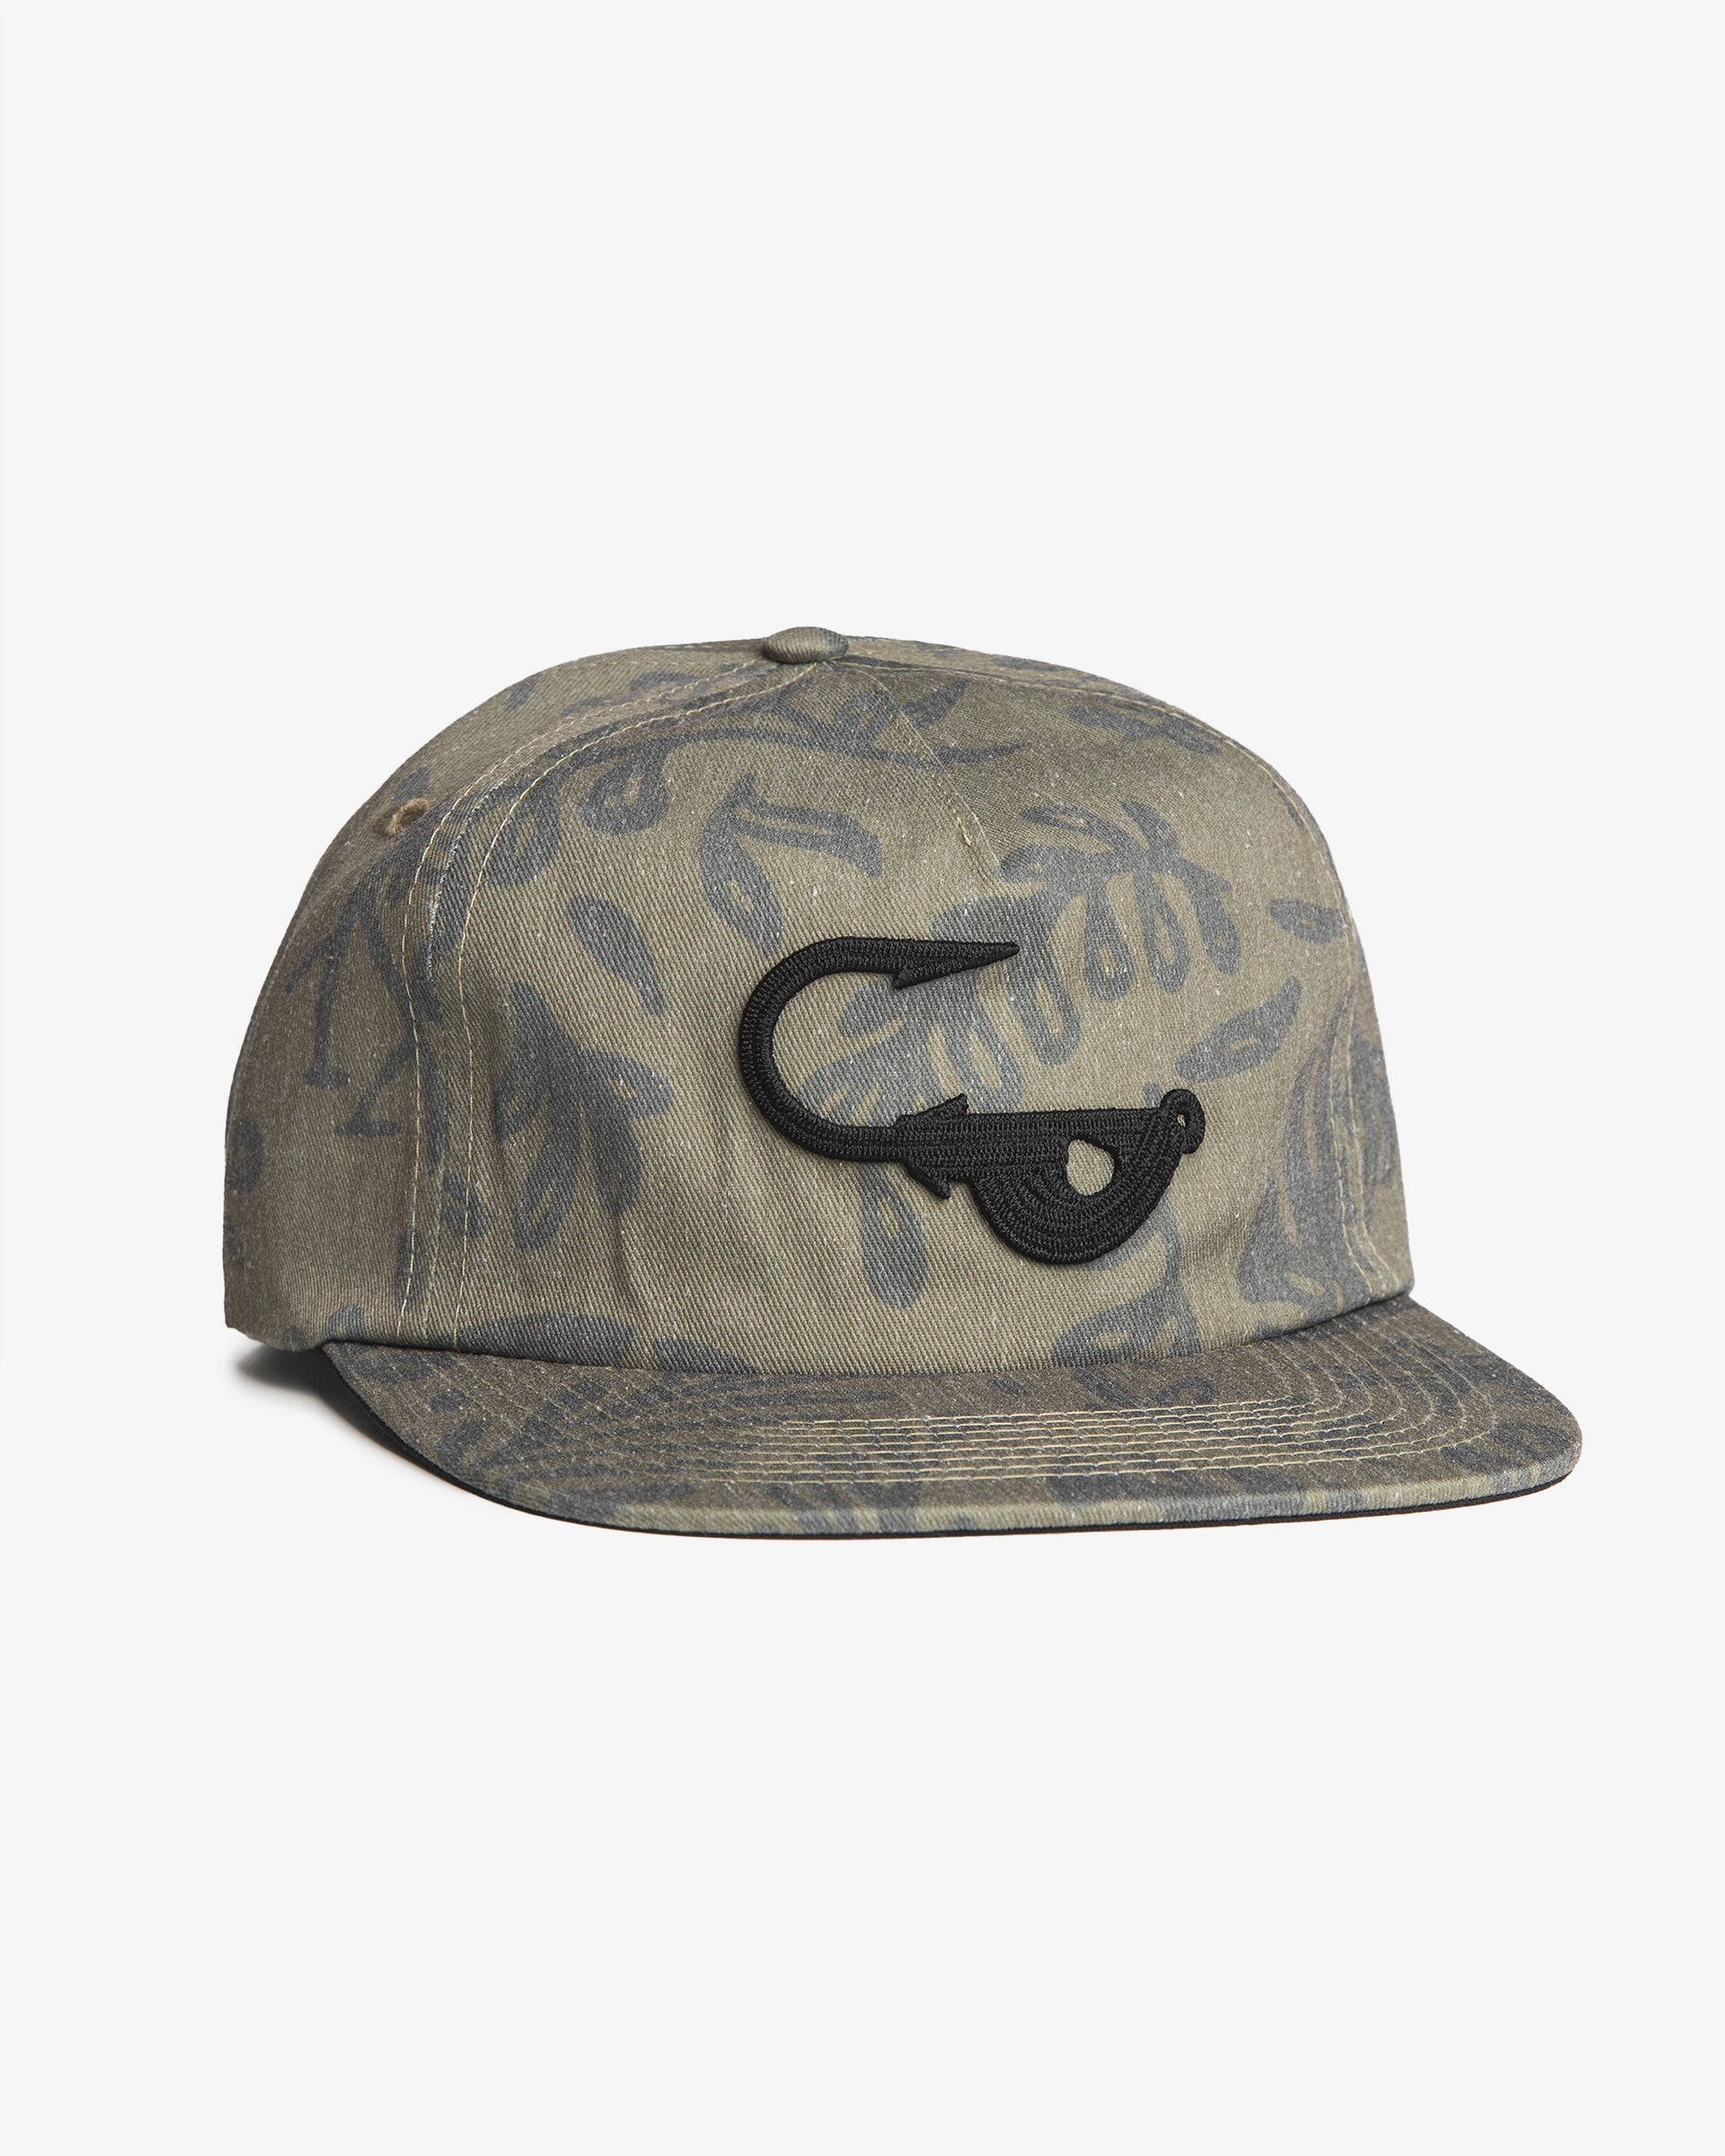 The Mighty Jig 5-Panel Hat, Fishing Hat